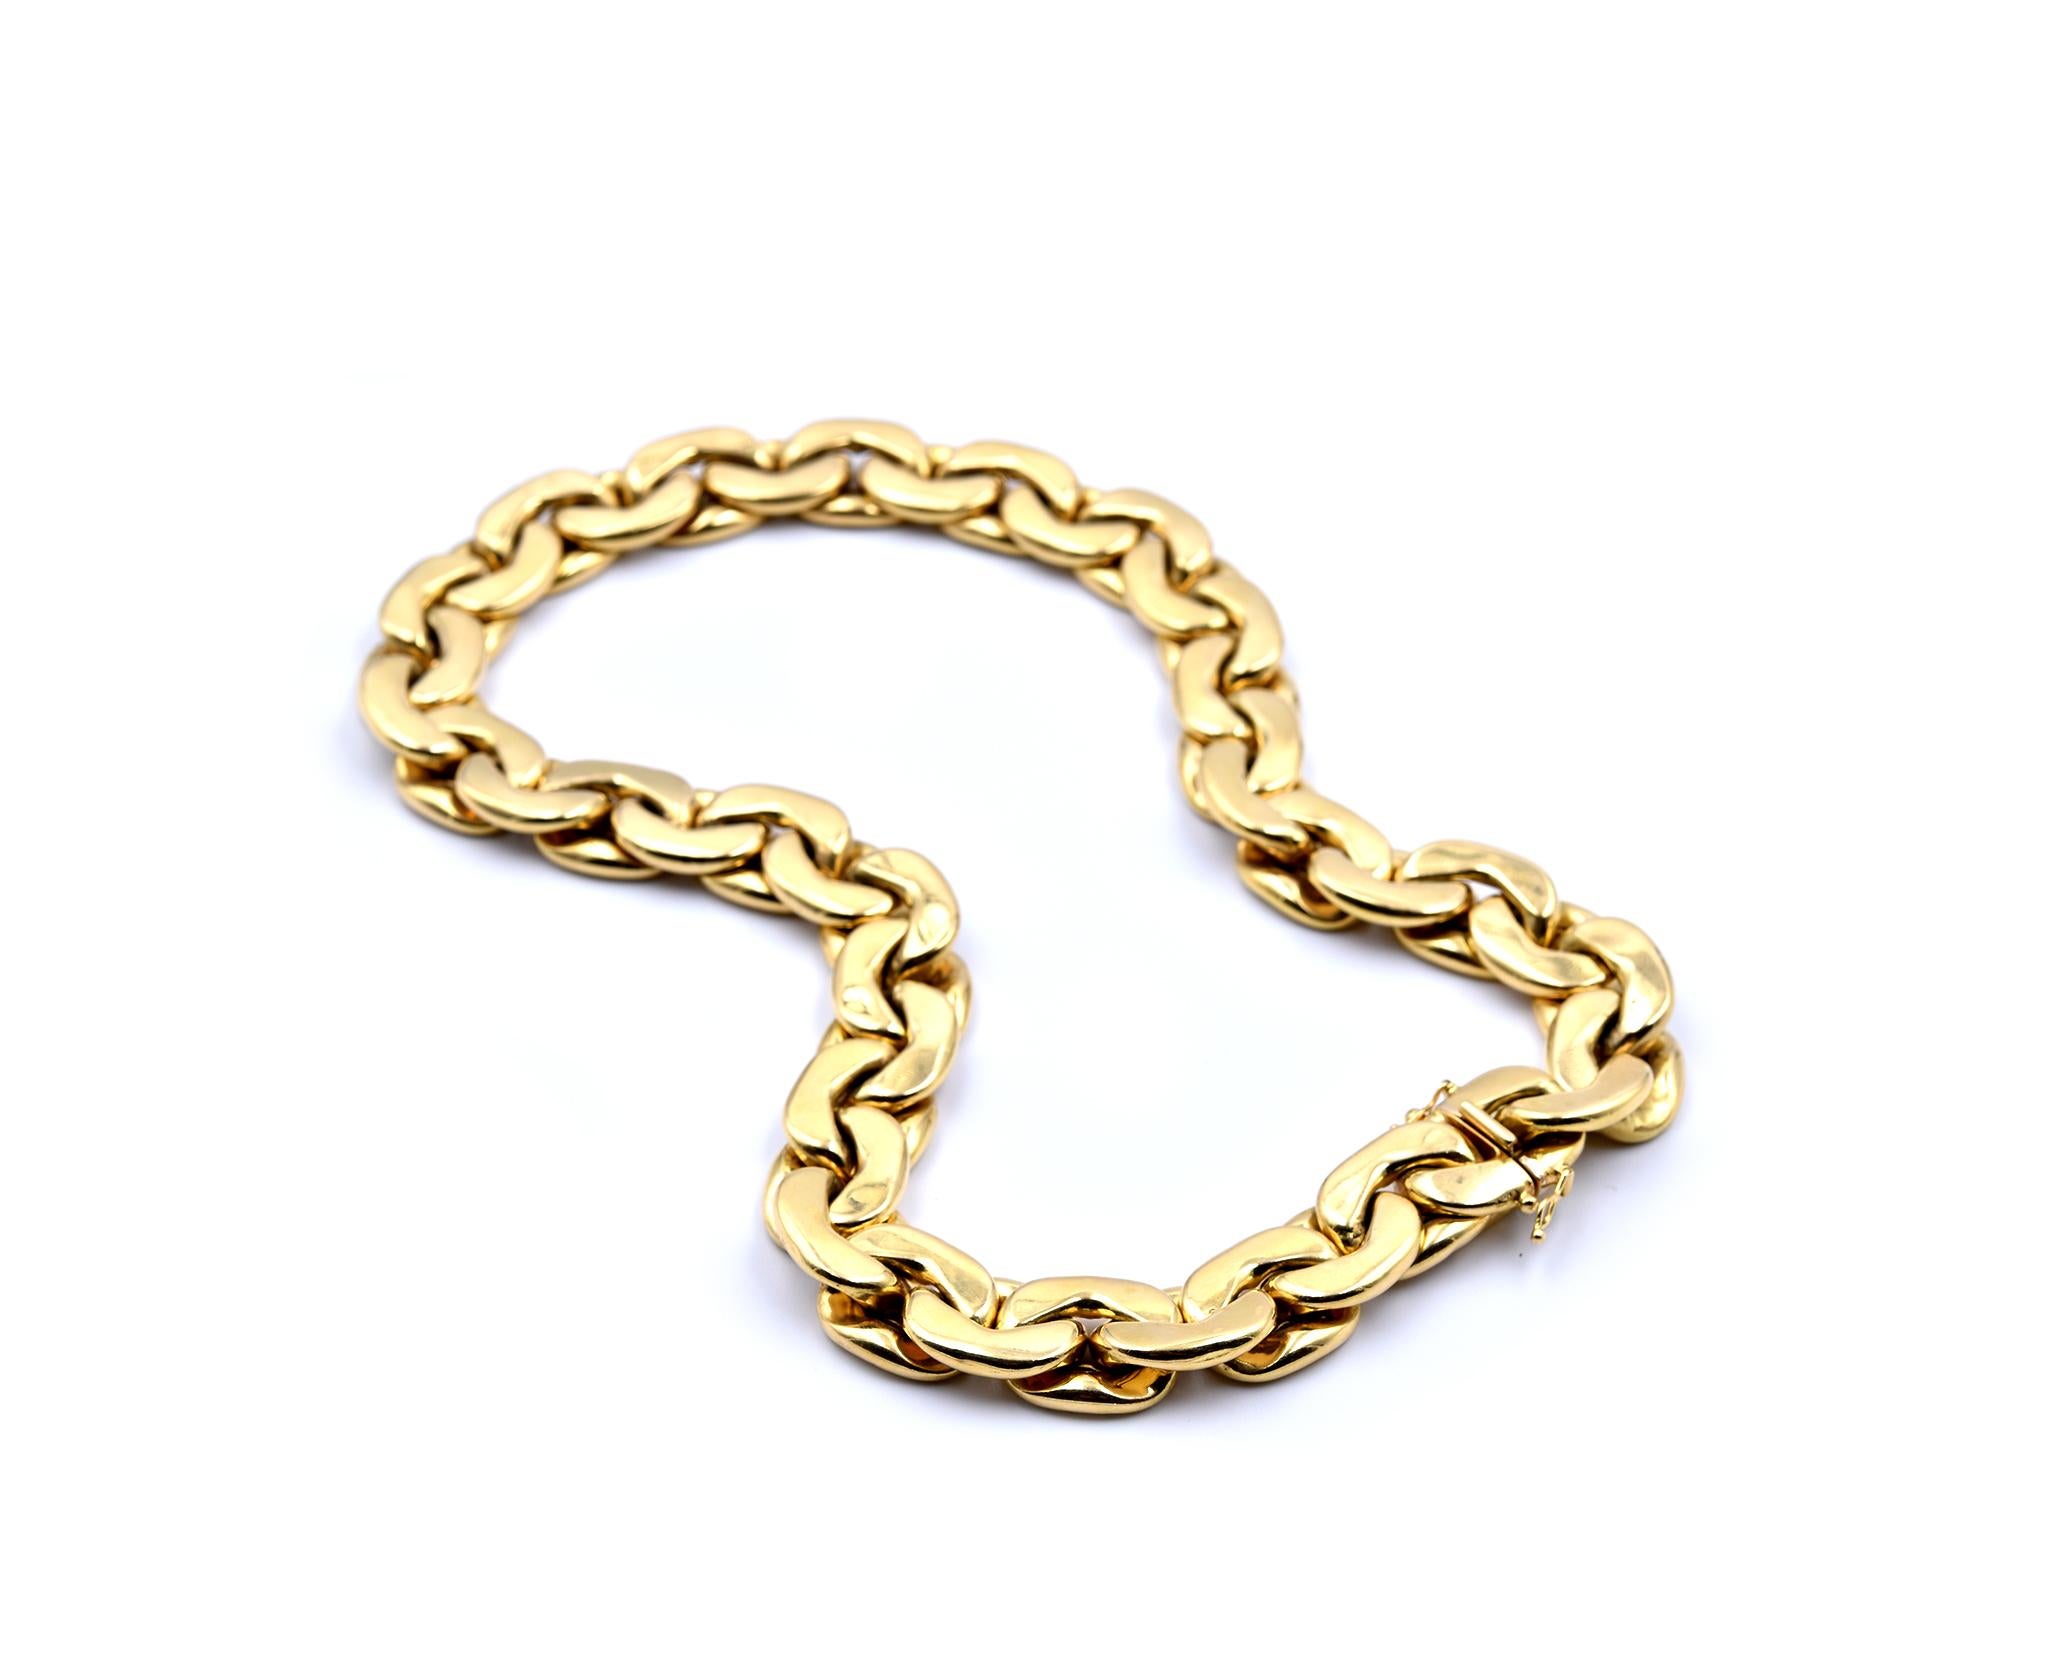 Women's or Men's 18 Karat Yellow Gold Oval Link Chain Necklace